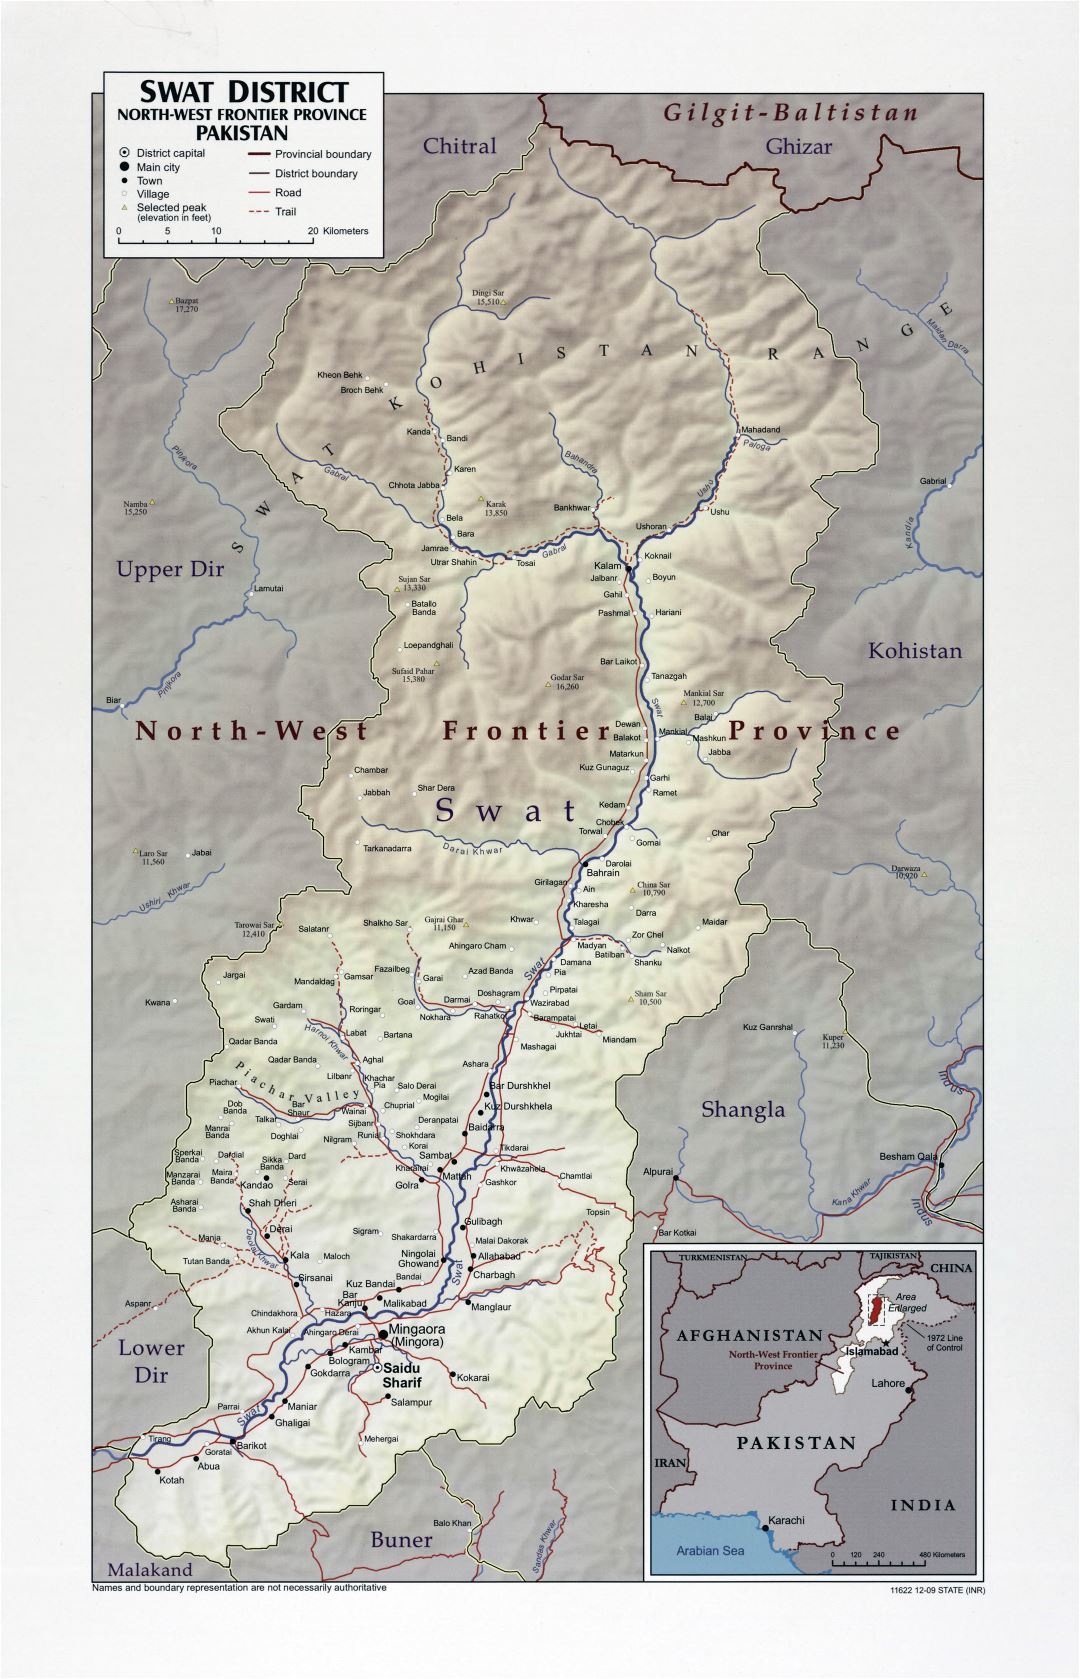 Large scale Swat District North West Frontier Province map of Pakistan with relief, roads, cities, towns and villages - 2009